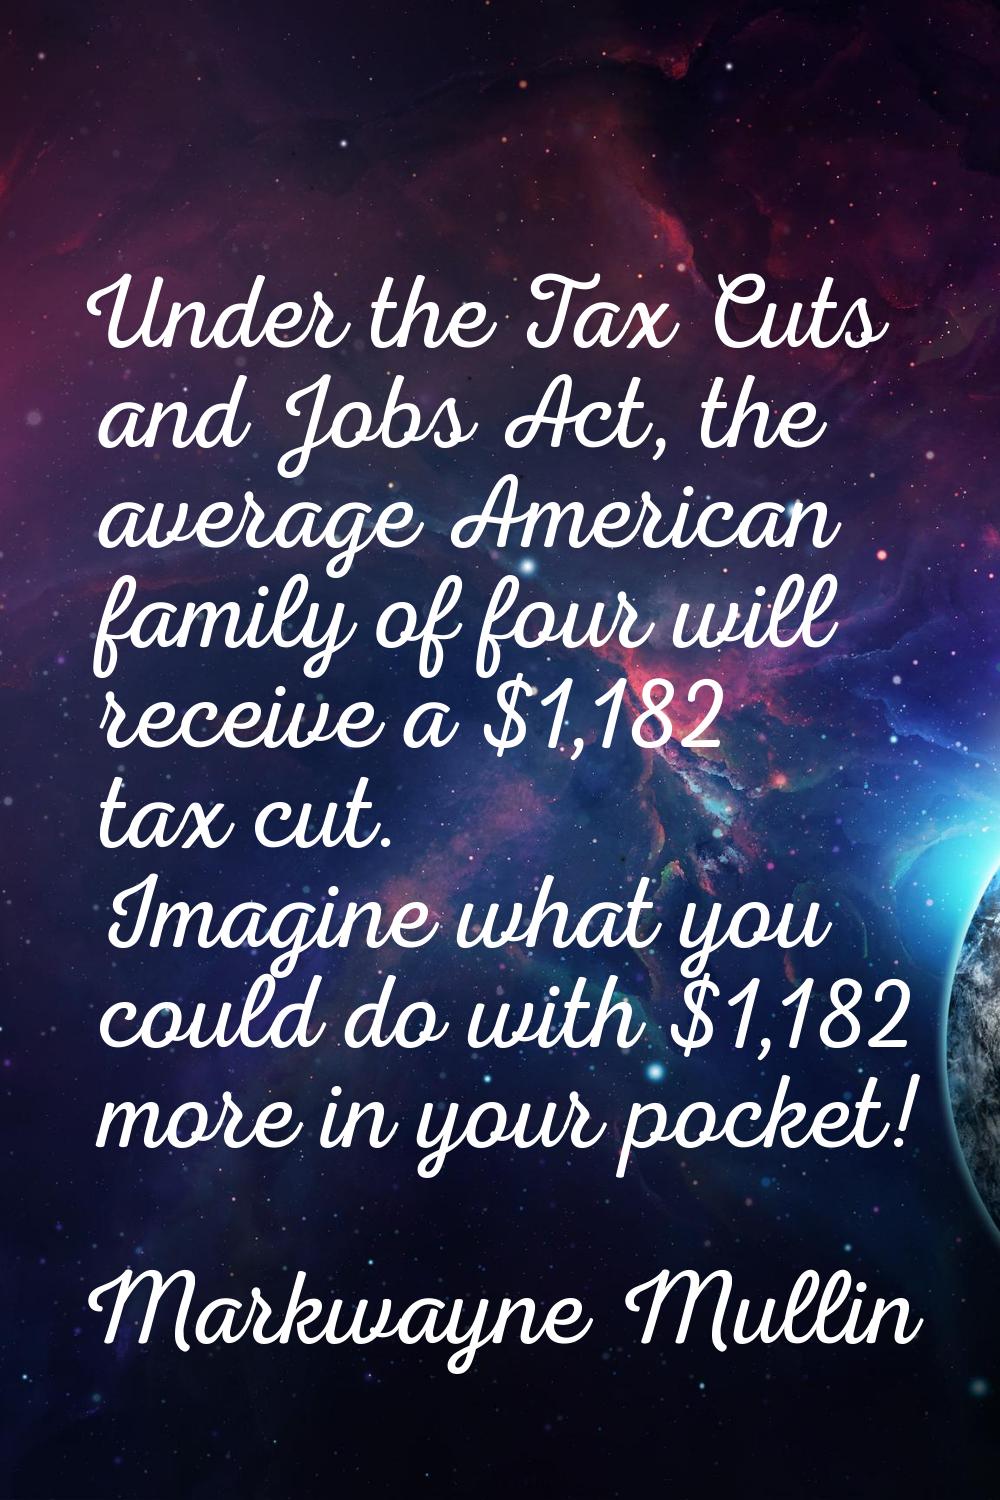 Under the Tax Cuts and Jobs Act, the average American family of four will receive a $1,182 tax cut.